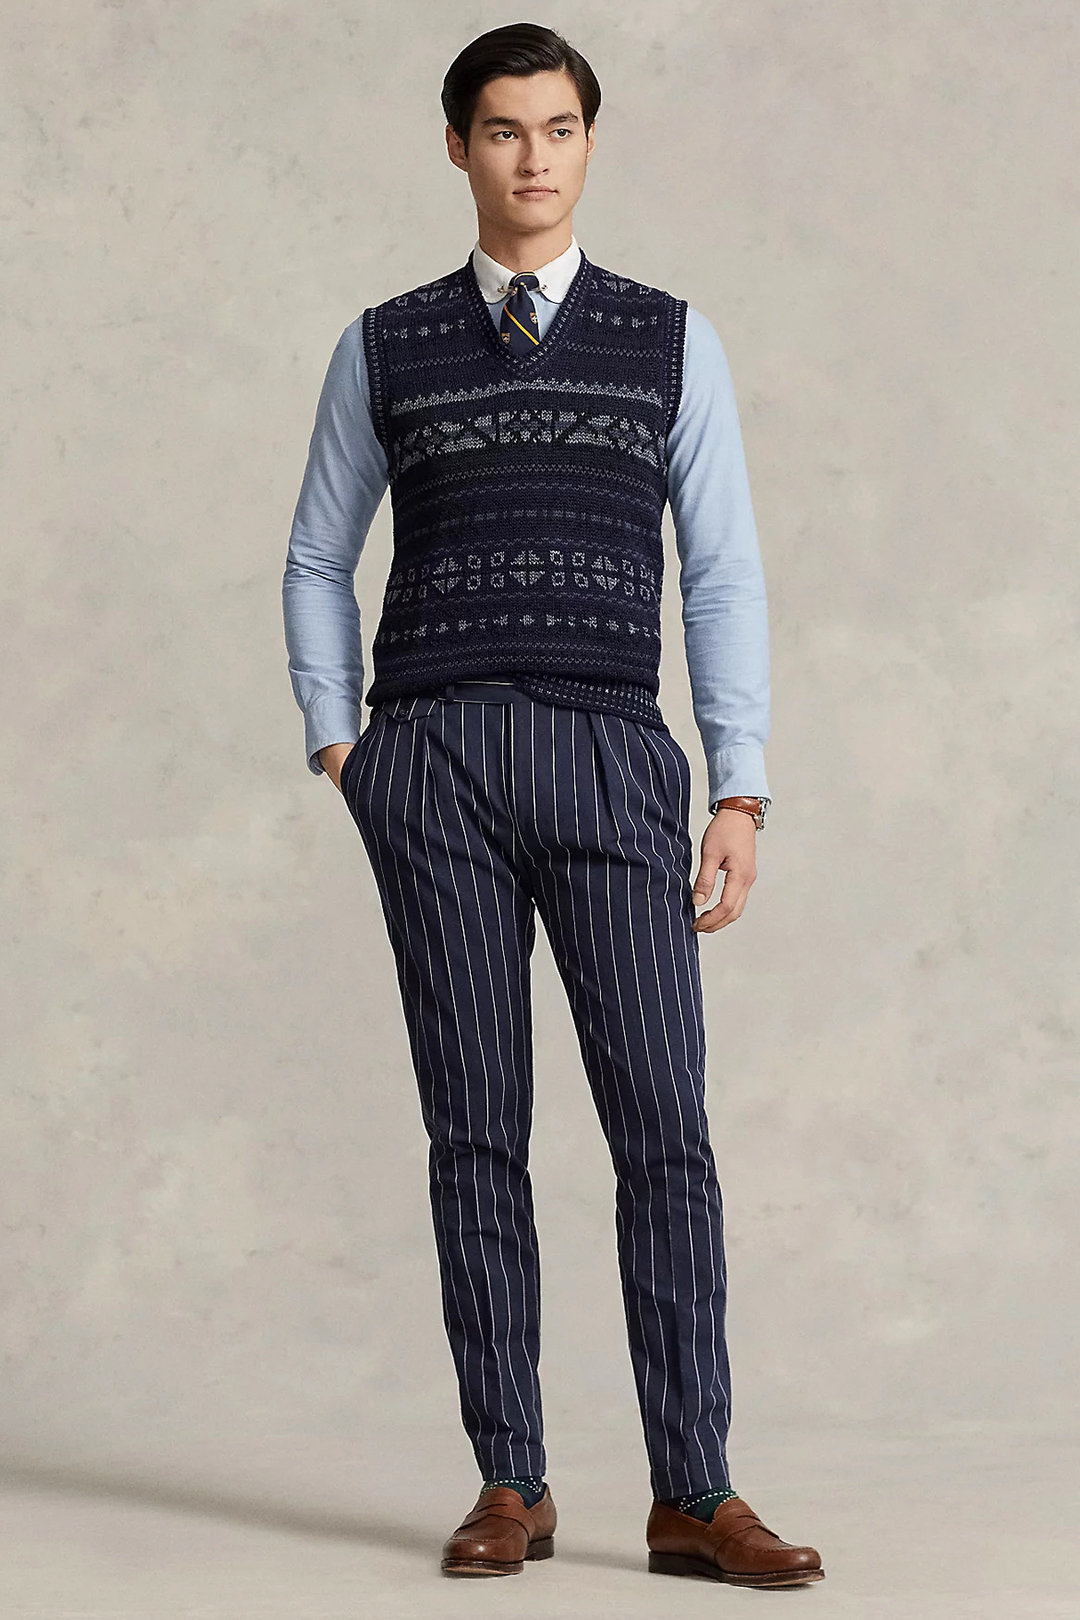 Navy fair isle sweater vest, blue shirt, striped silk club tie, navy dress pants and brown penny loafers outfit